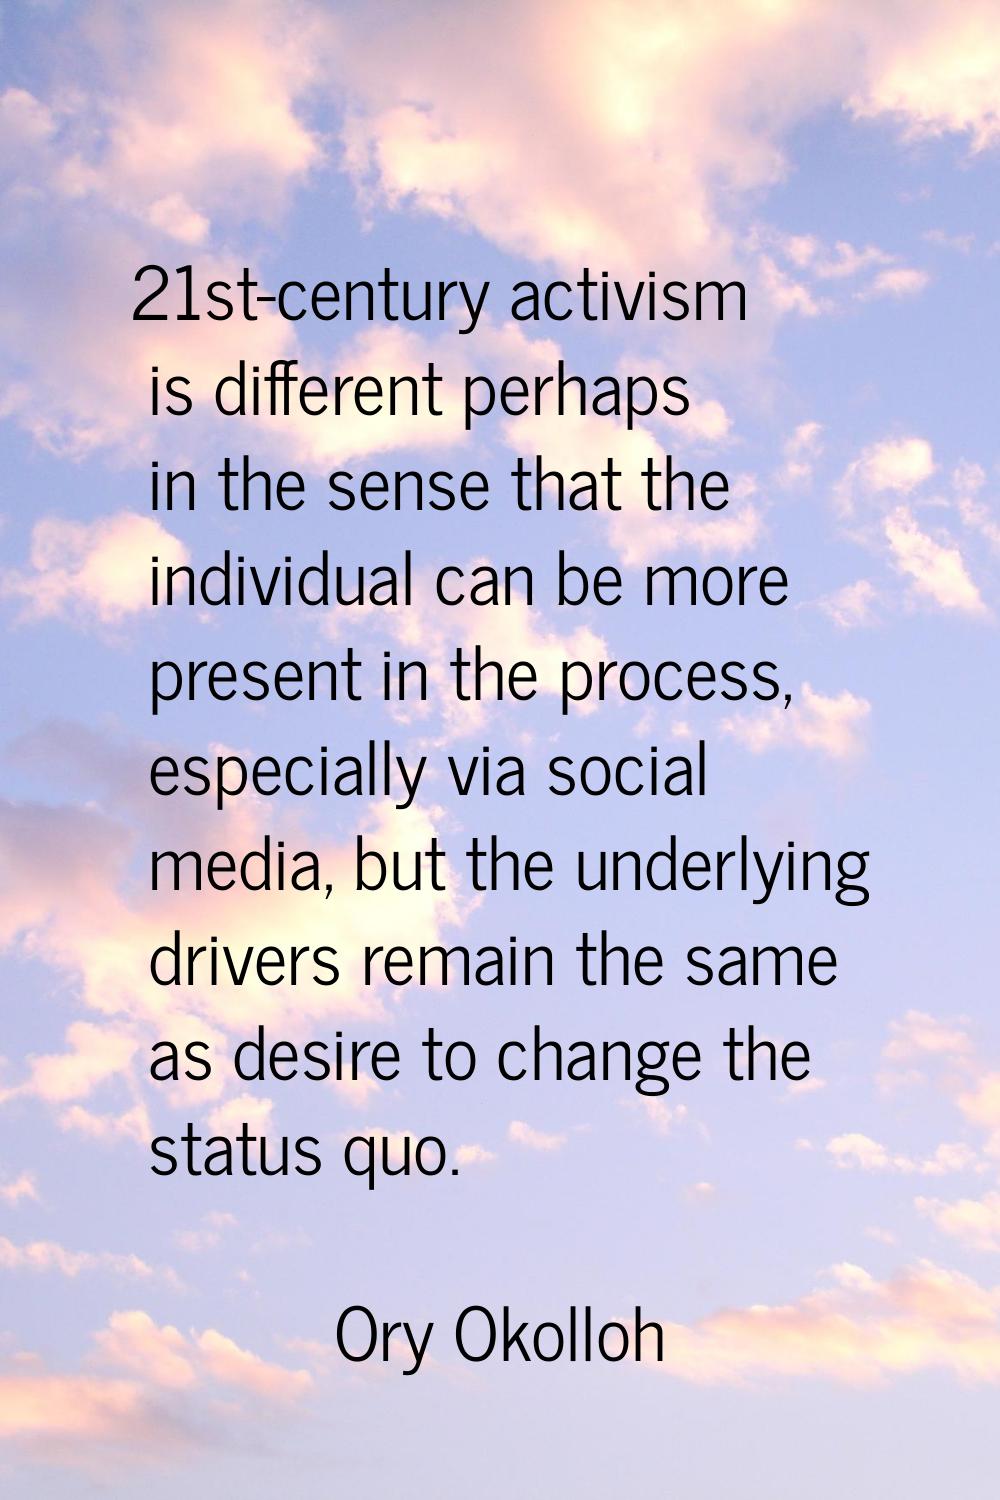 21st-century activism is different perhaps in the sense that the individual can be more present in 